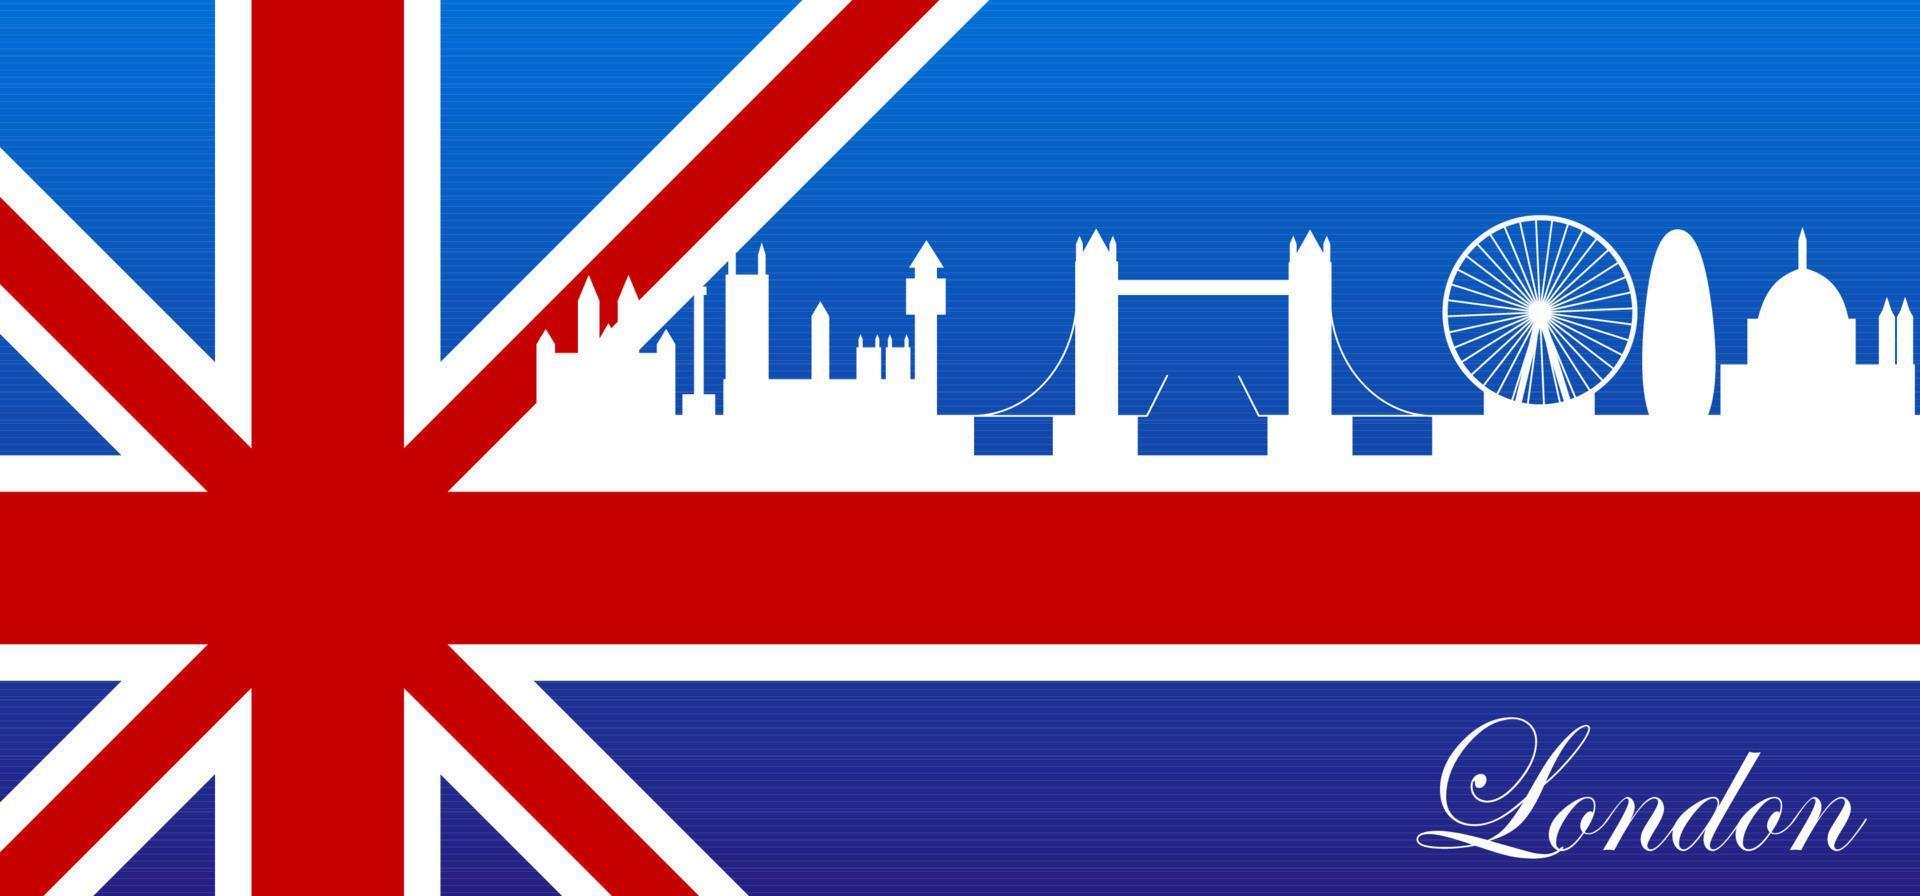 Silhouette of London city against the background of the British flag. Great design for greeting card, invitation, print, banner, poster, social media, collage, web. Vector illustration